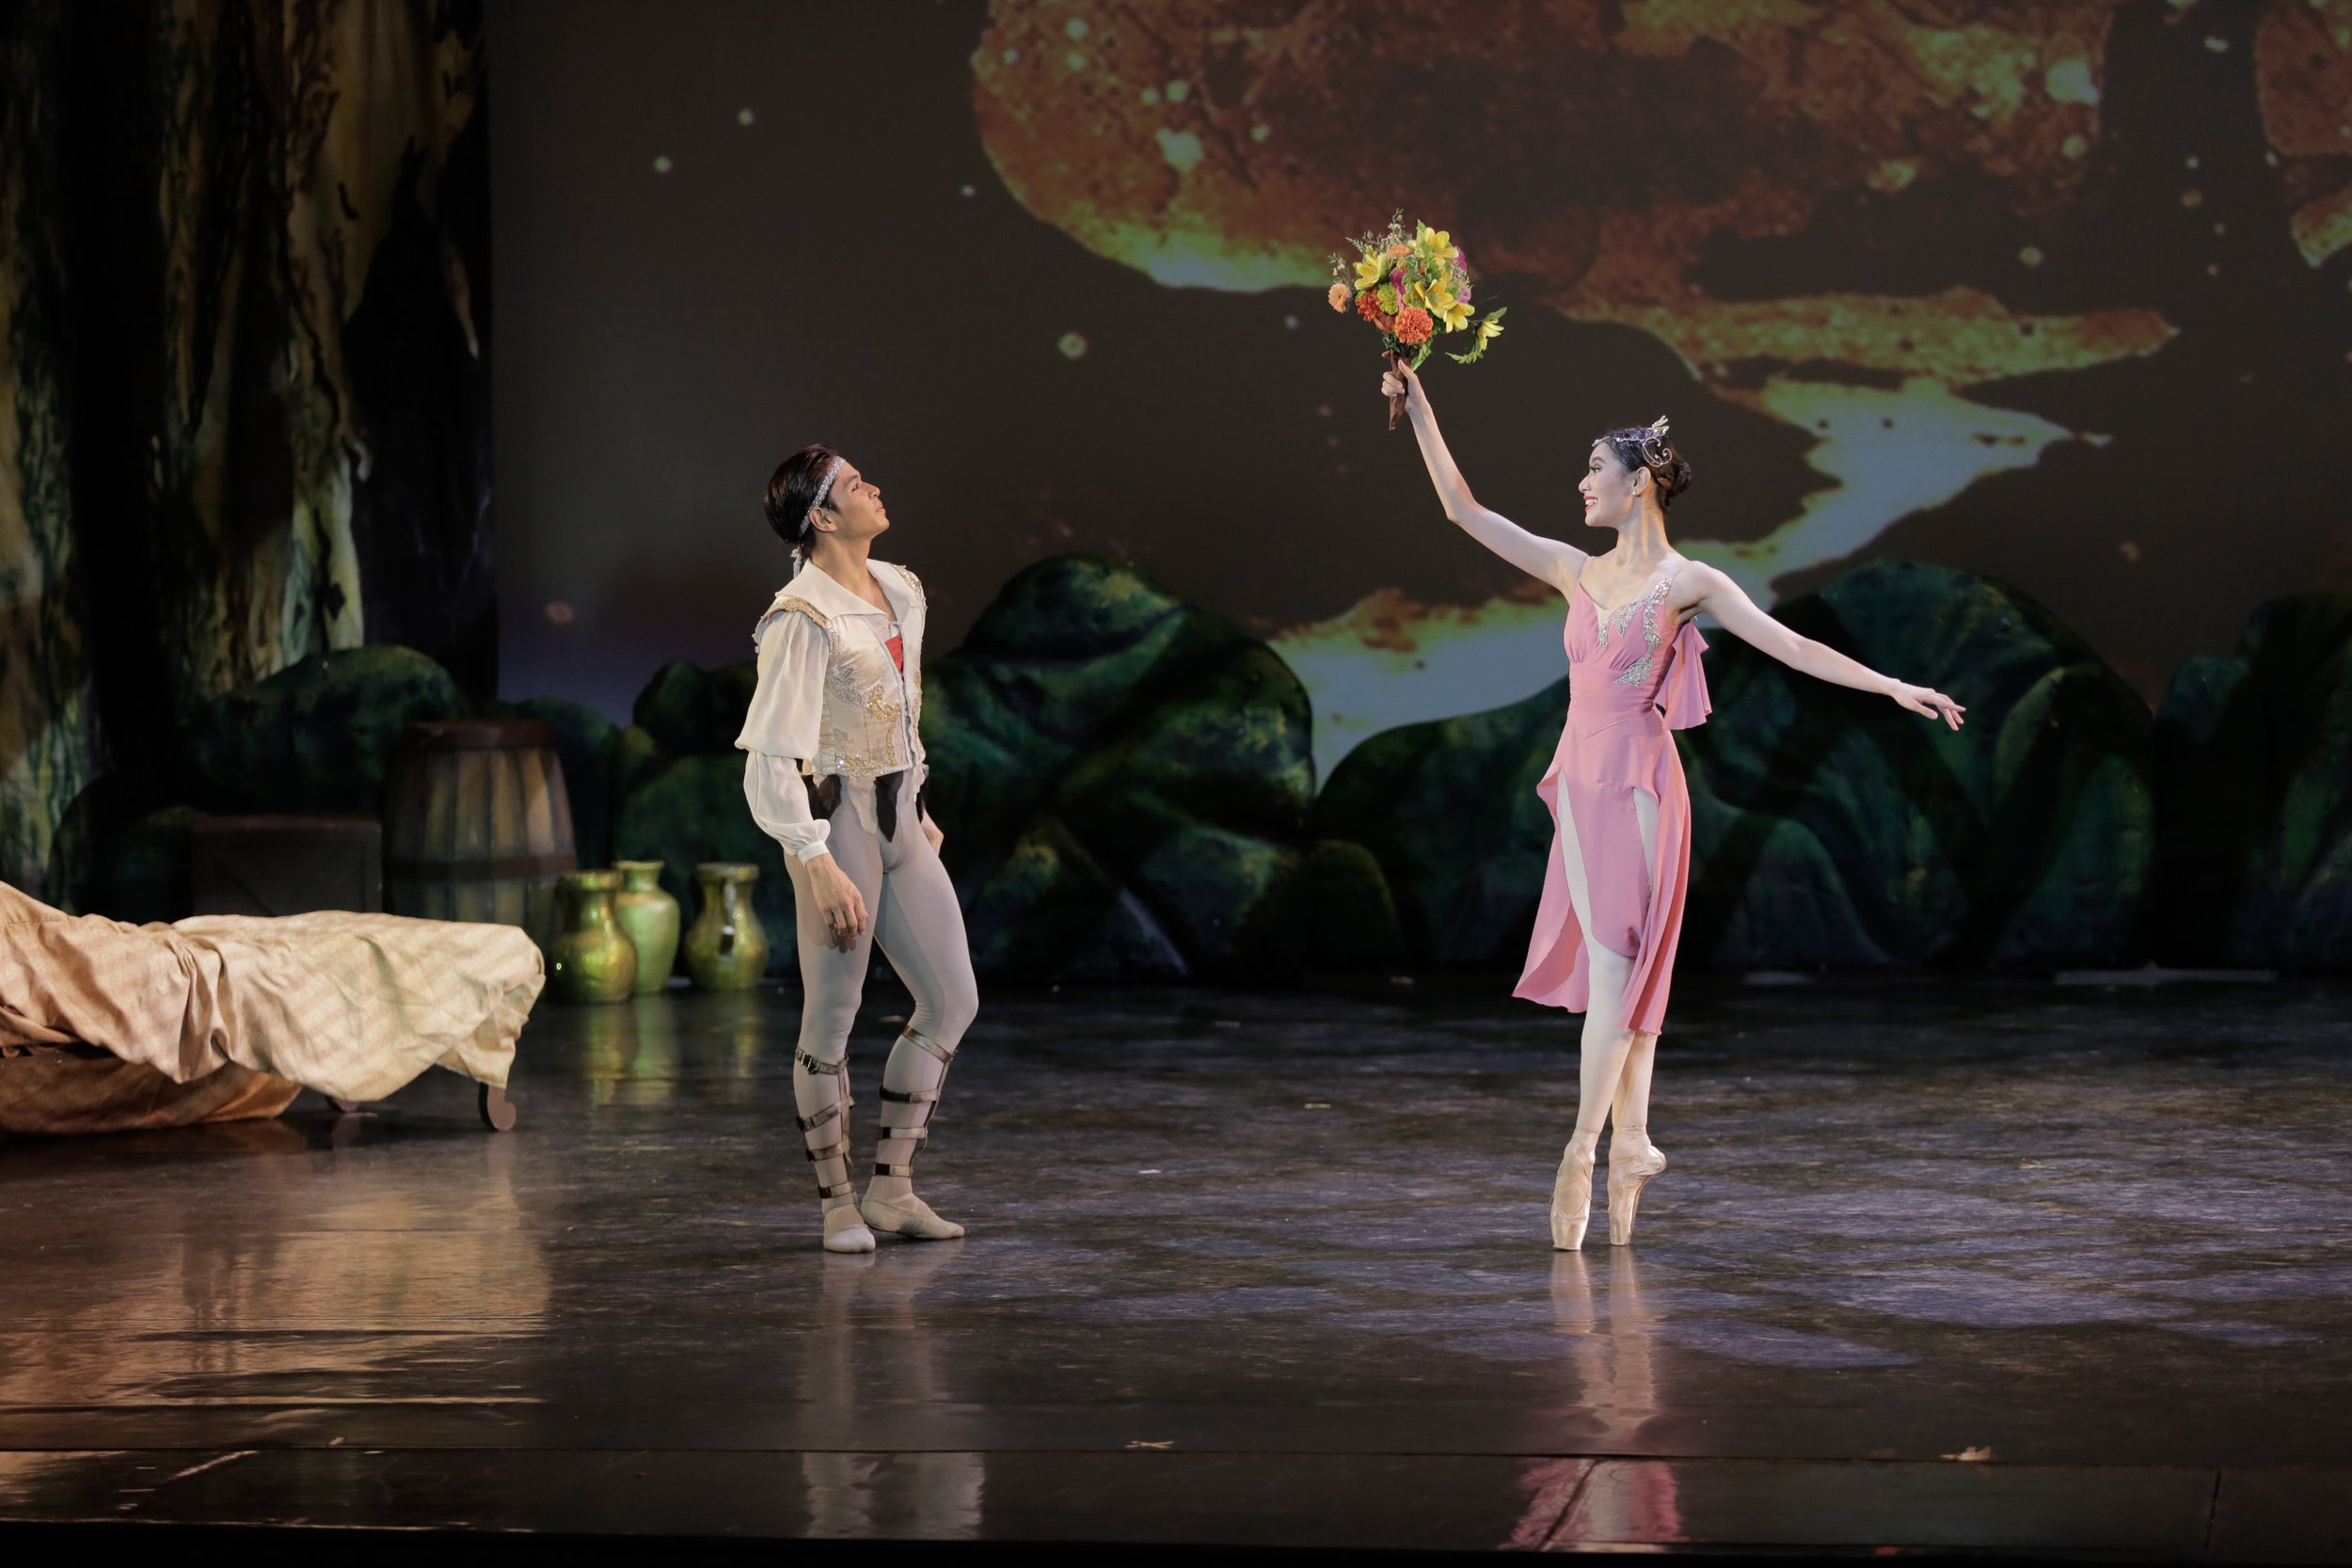    Medora (Abigail Oliveiro) joyfully shows Conrad (Mark Sumaylo) the bouquet of flowers she has just received in  Le Corsaire  (2018), unknowing of the fate that will soon befall them. The bouquet has been sprayed with a potion that puts Conrad to s